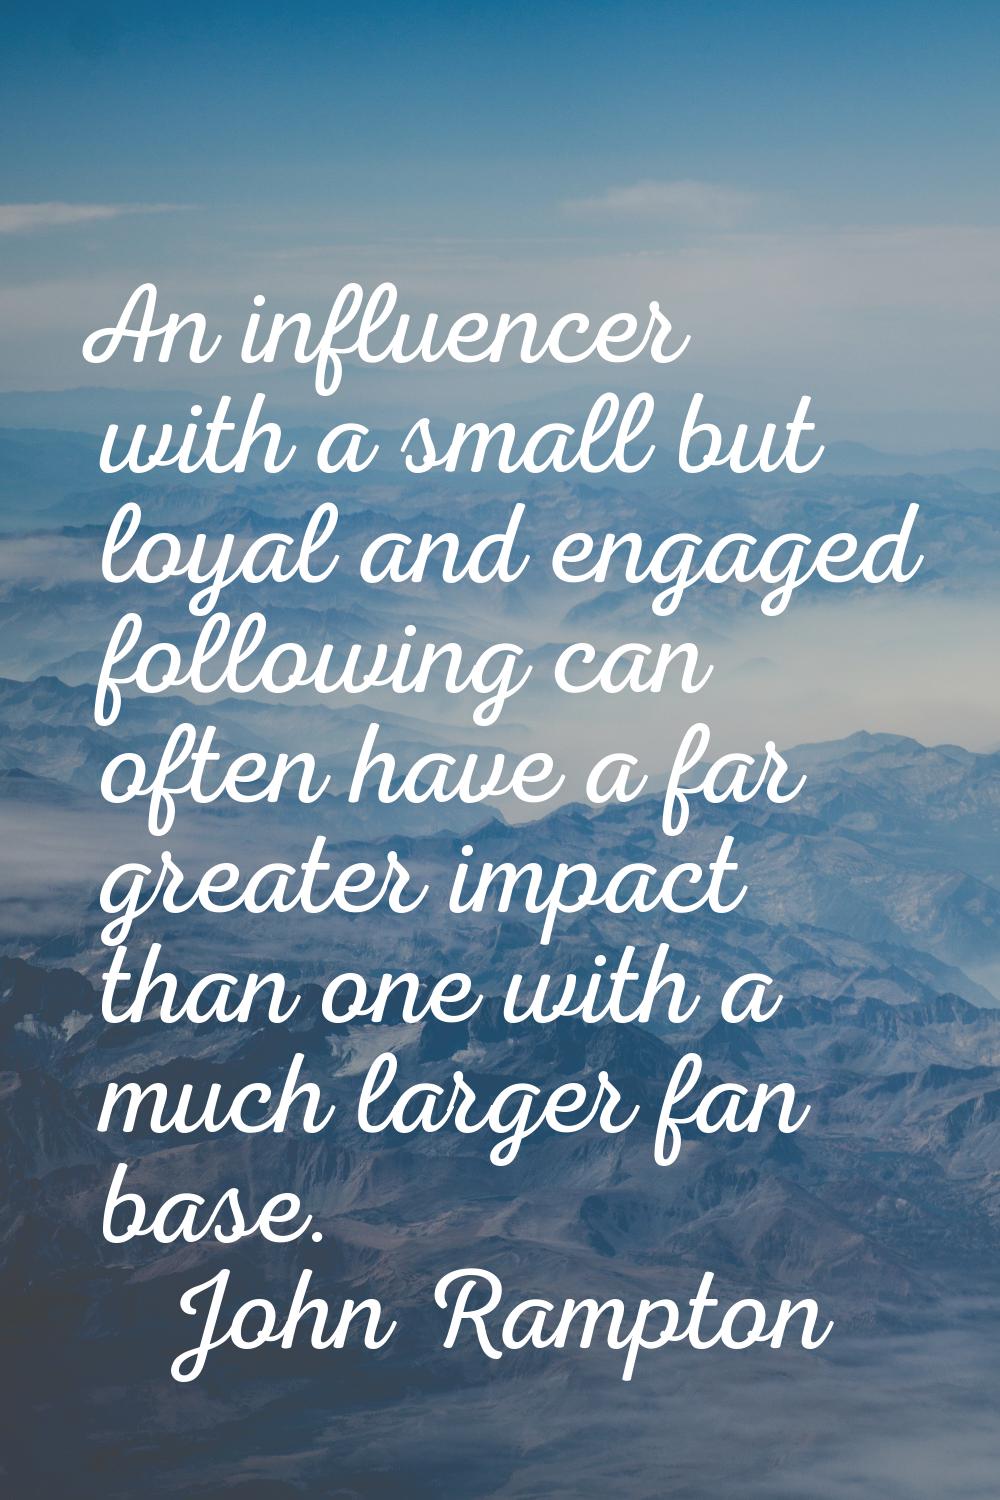 An influencer with a small but loyal and engaged following can often have a far greater impact than